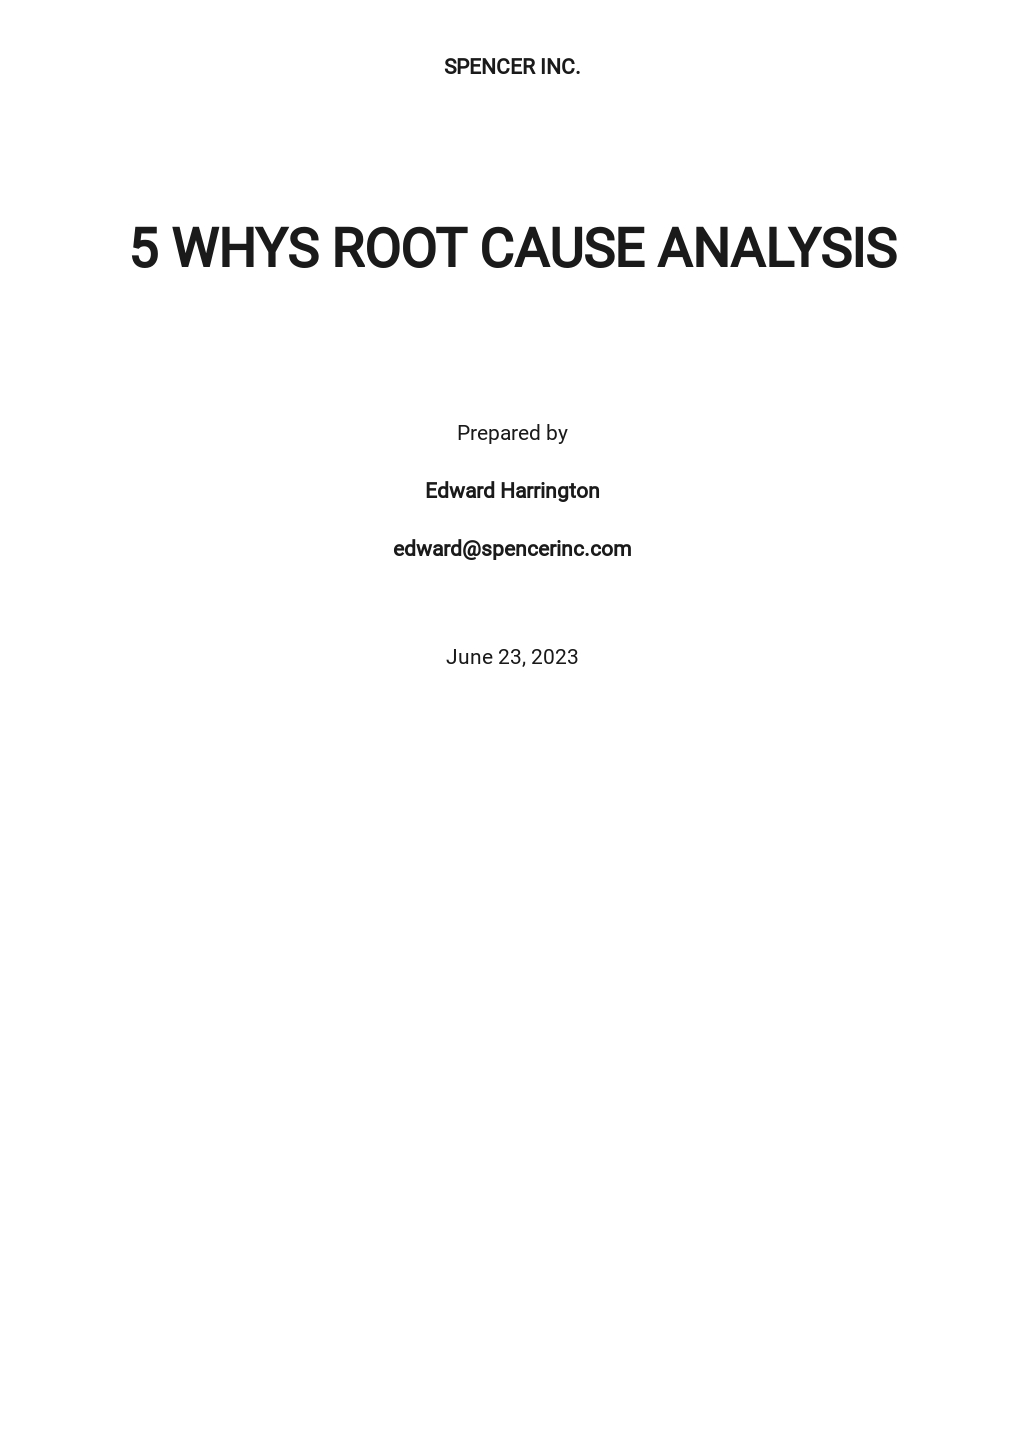 5 Whys Root Cause Analysis Template.jpe